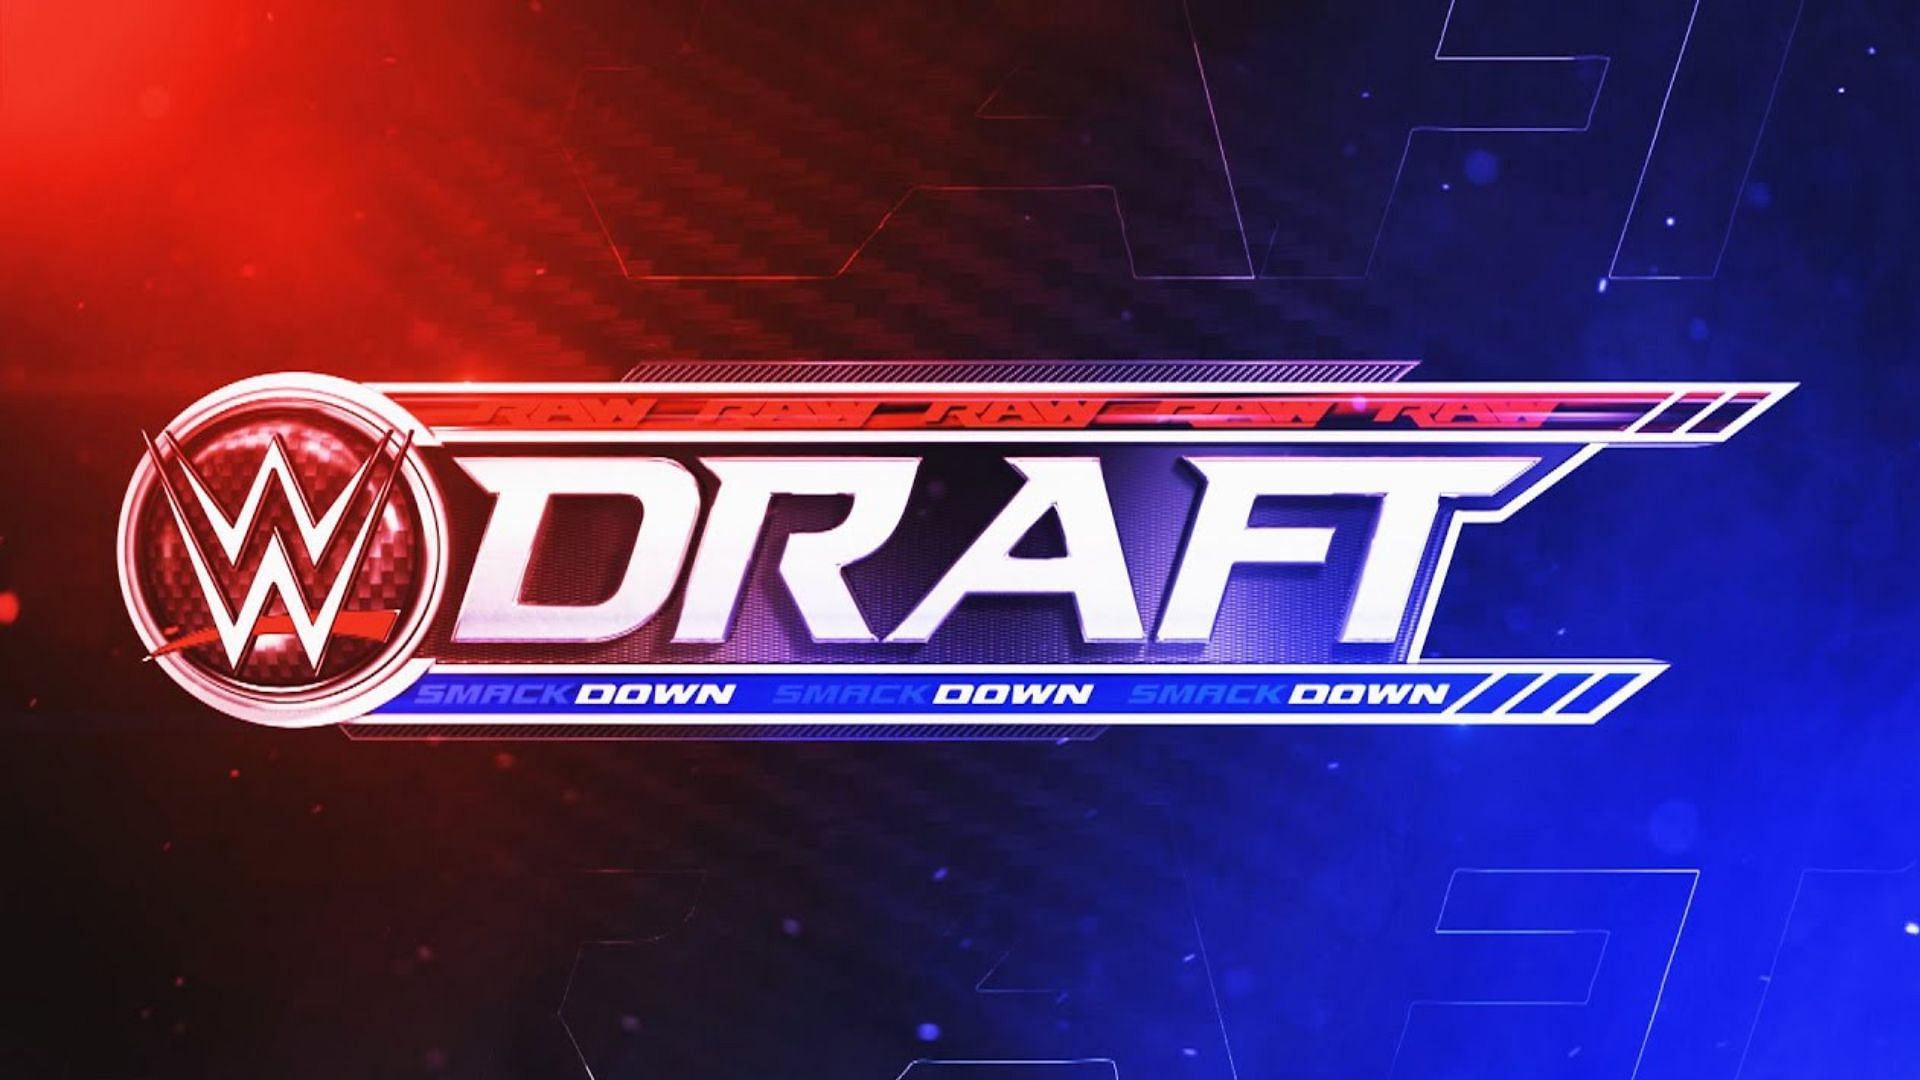 WWE Draft 2023 took place in April and May!